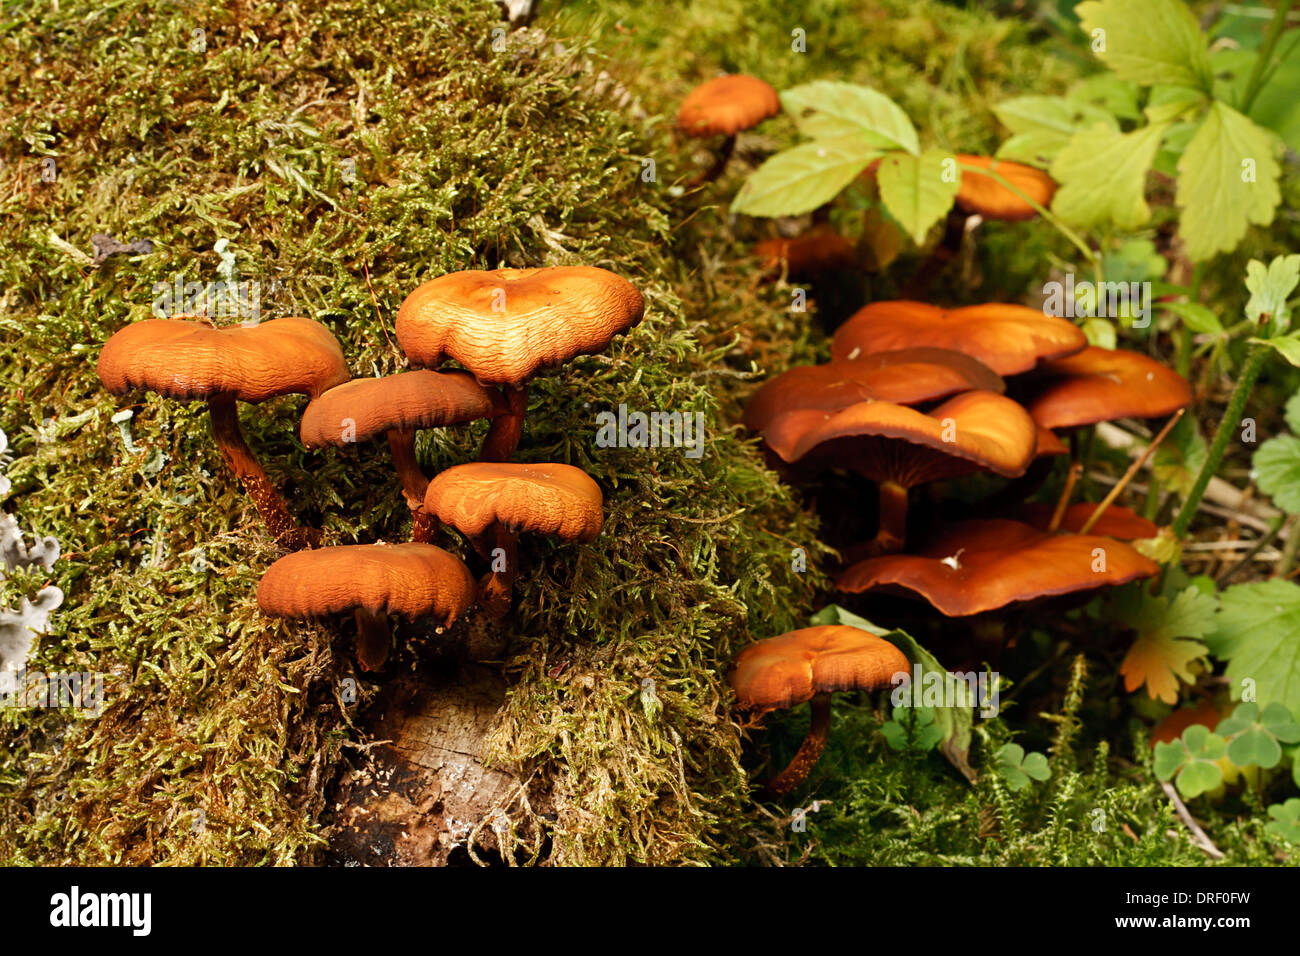 Funghi on the side of a decomposing tree in the woods during the autumn season Stock Photo